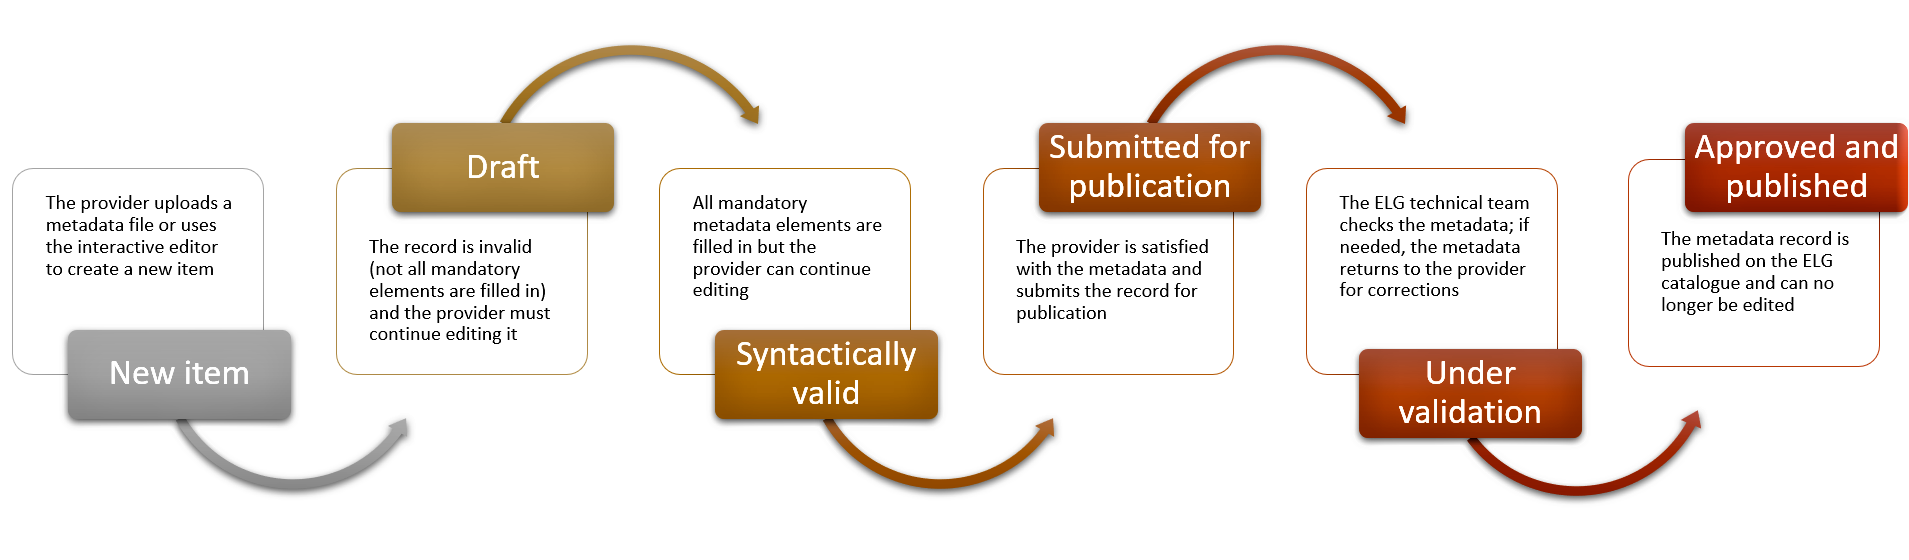 Publication lifecycle